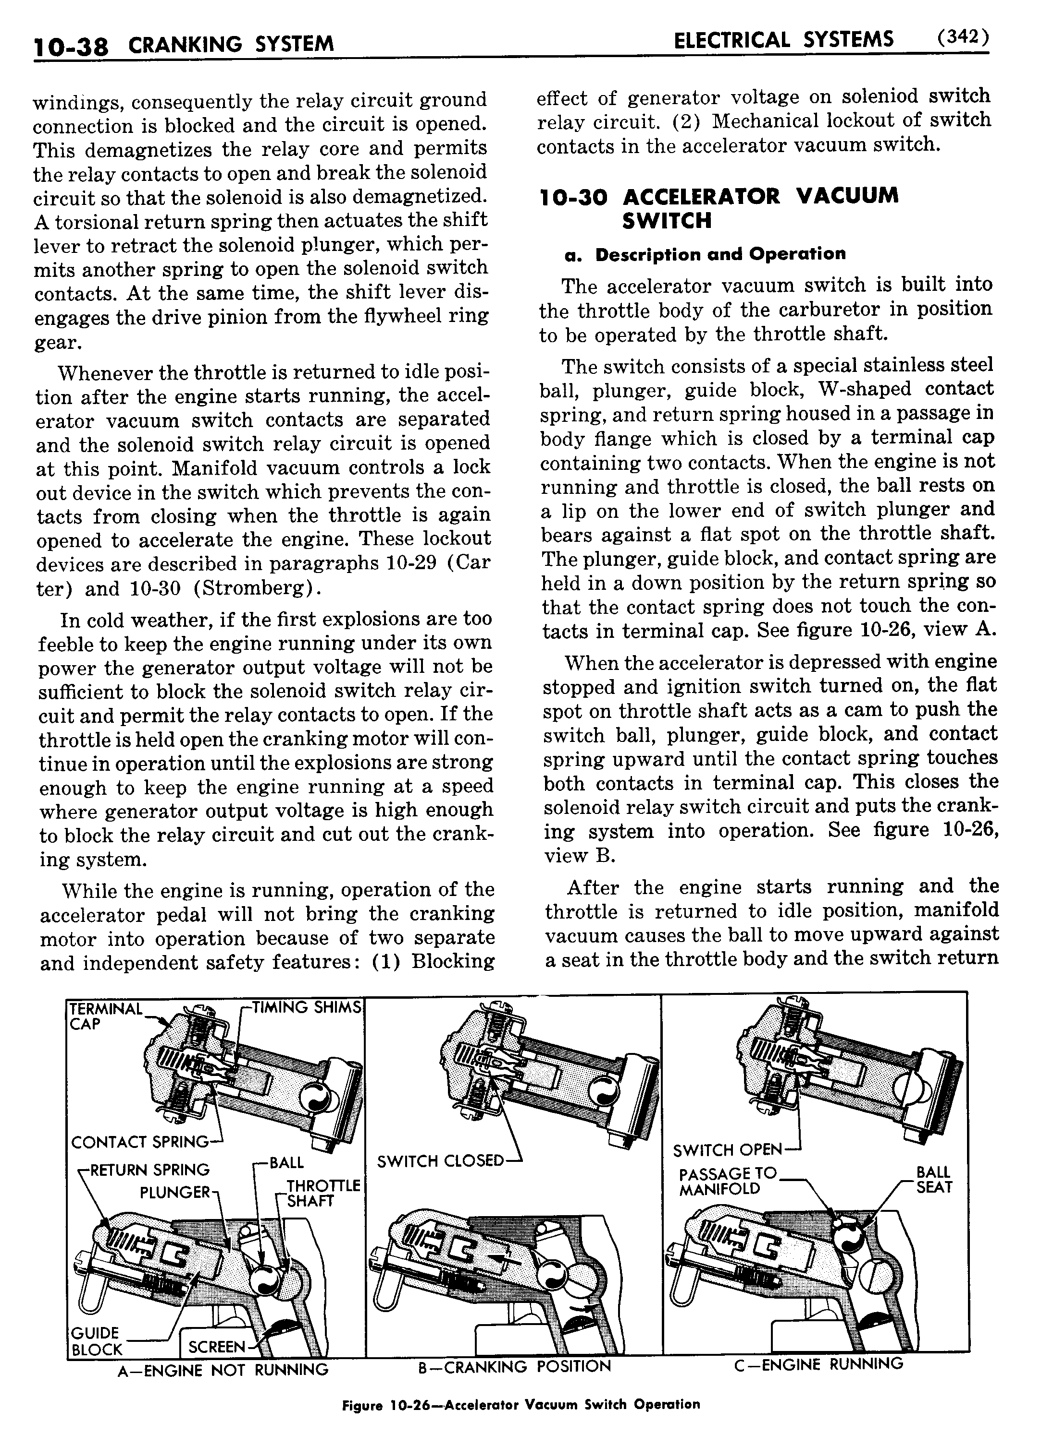 n_11 1955 Buick Shop Manual - Electrical Systems-038-038.jpg